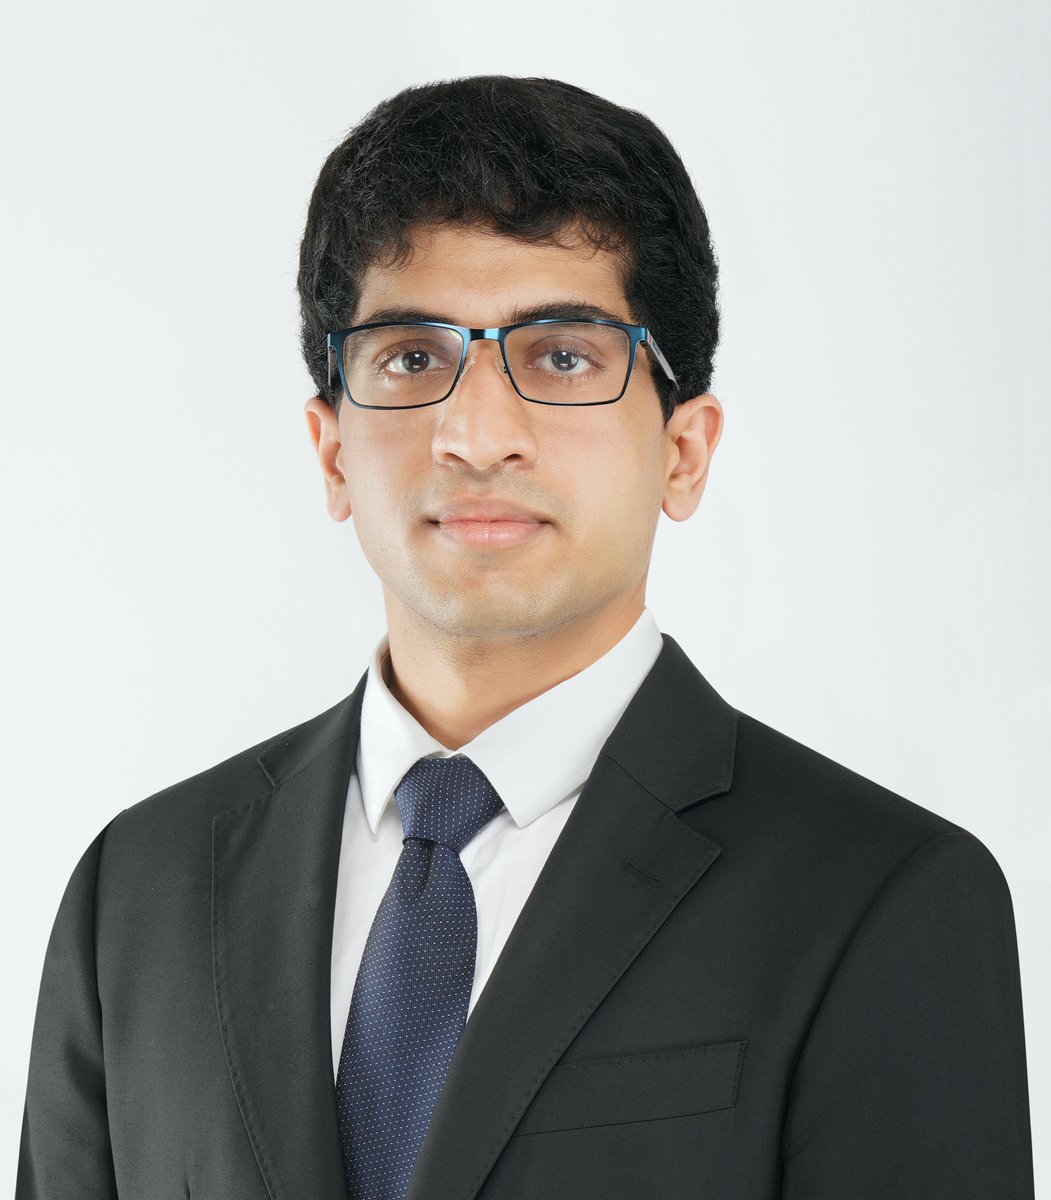 Hi #MedTwitter! I am Vaibhav Gulati, an IMG from India applying to #Radiology for #Match2022. Looking forward to connecting with fellow applicants and mentors! Best of luck to everyone applying! #RadTwitter #FutureRadRes @Inside_TheMatch @futureradres